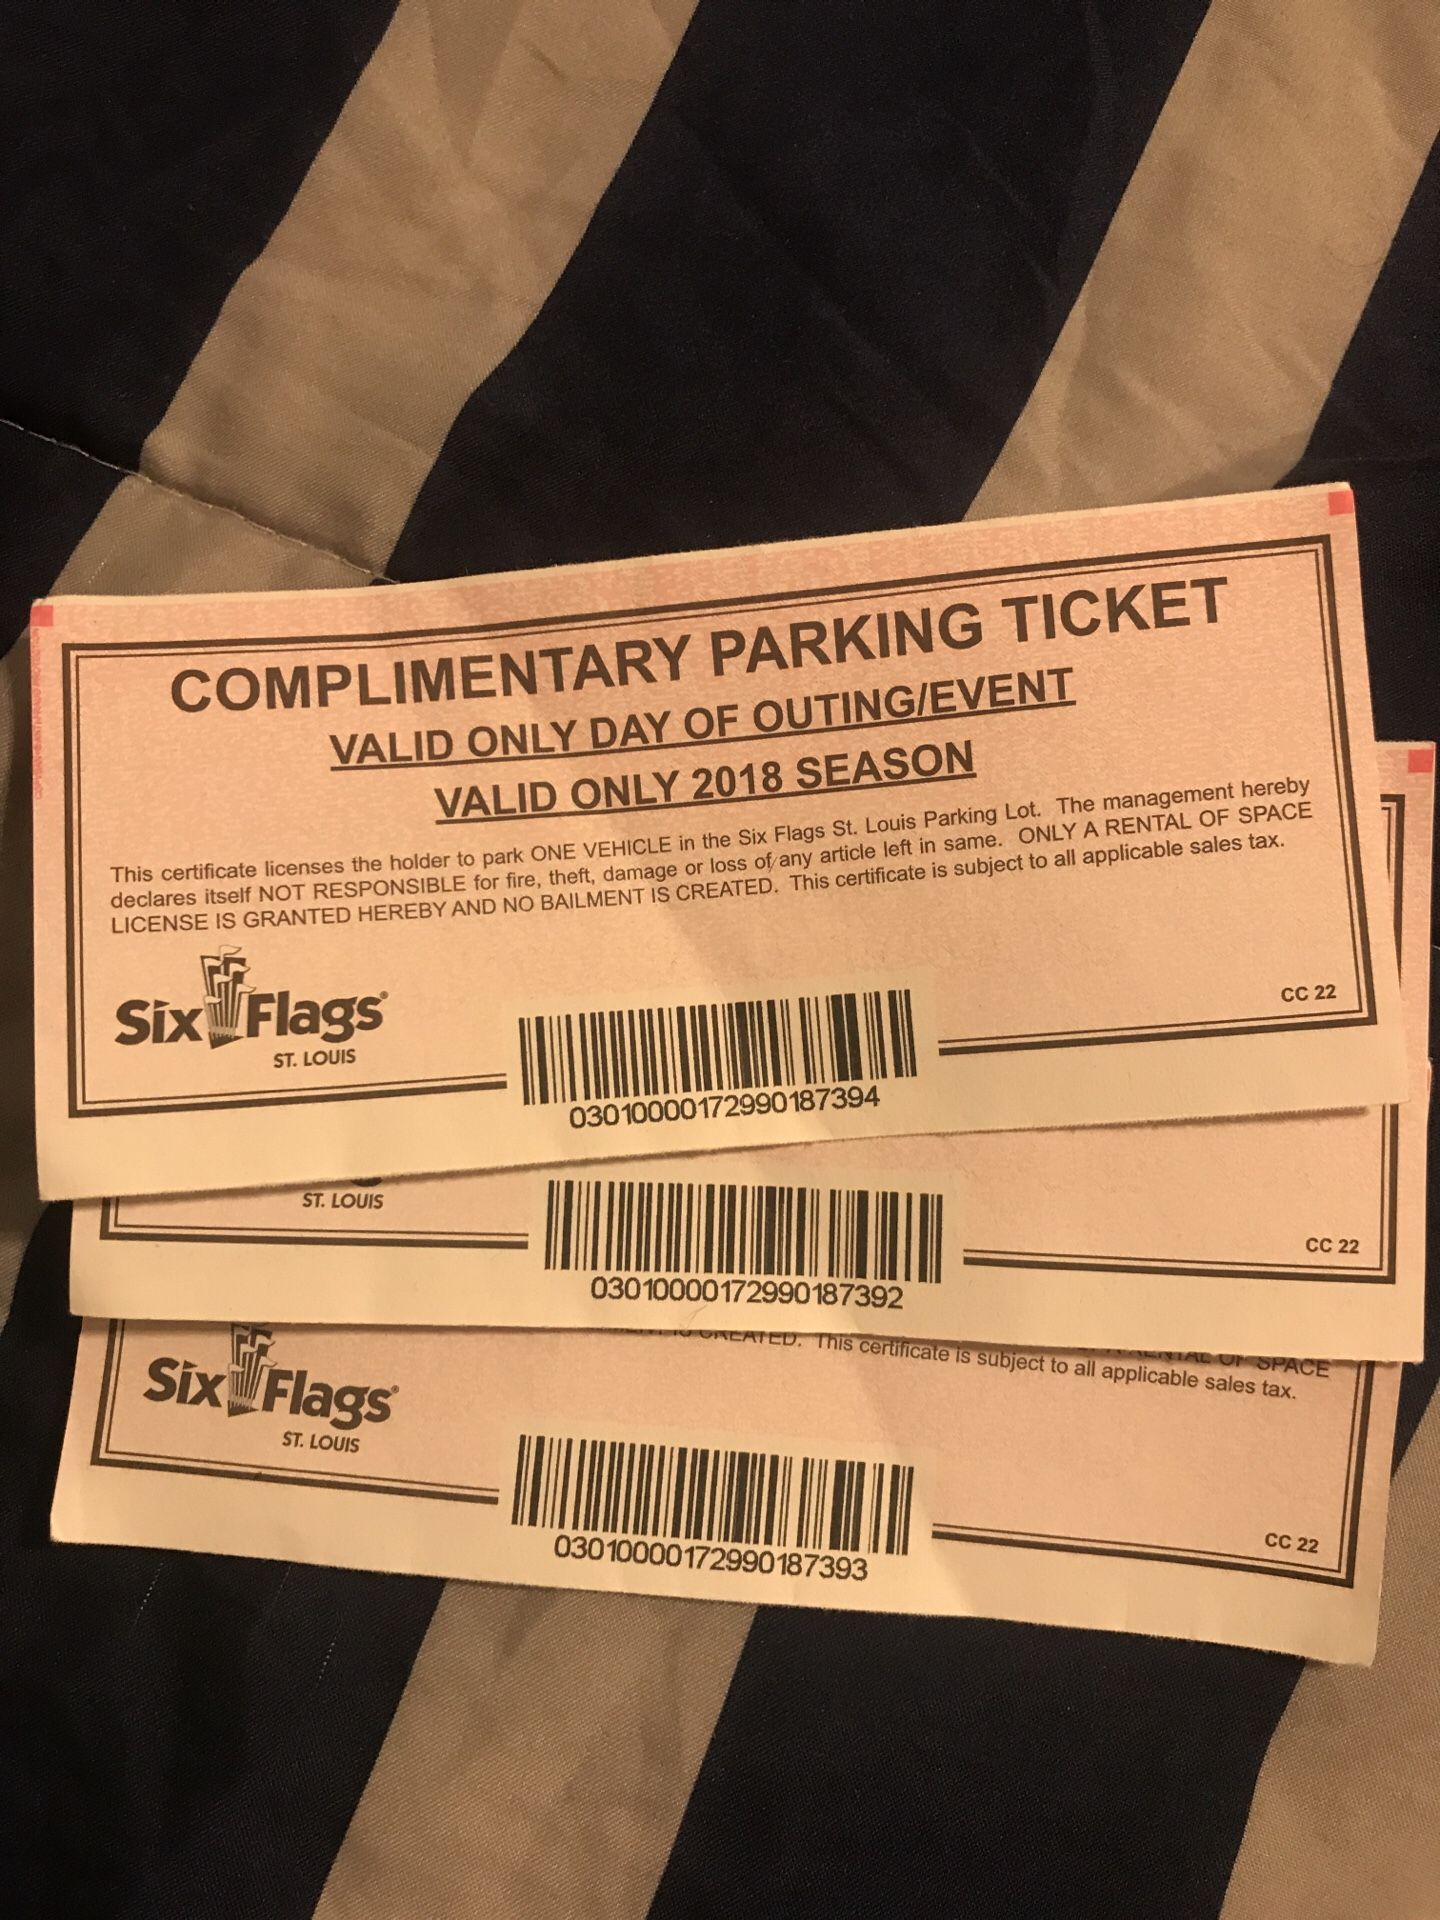 Six flags parking ticket